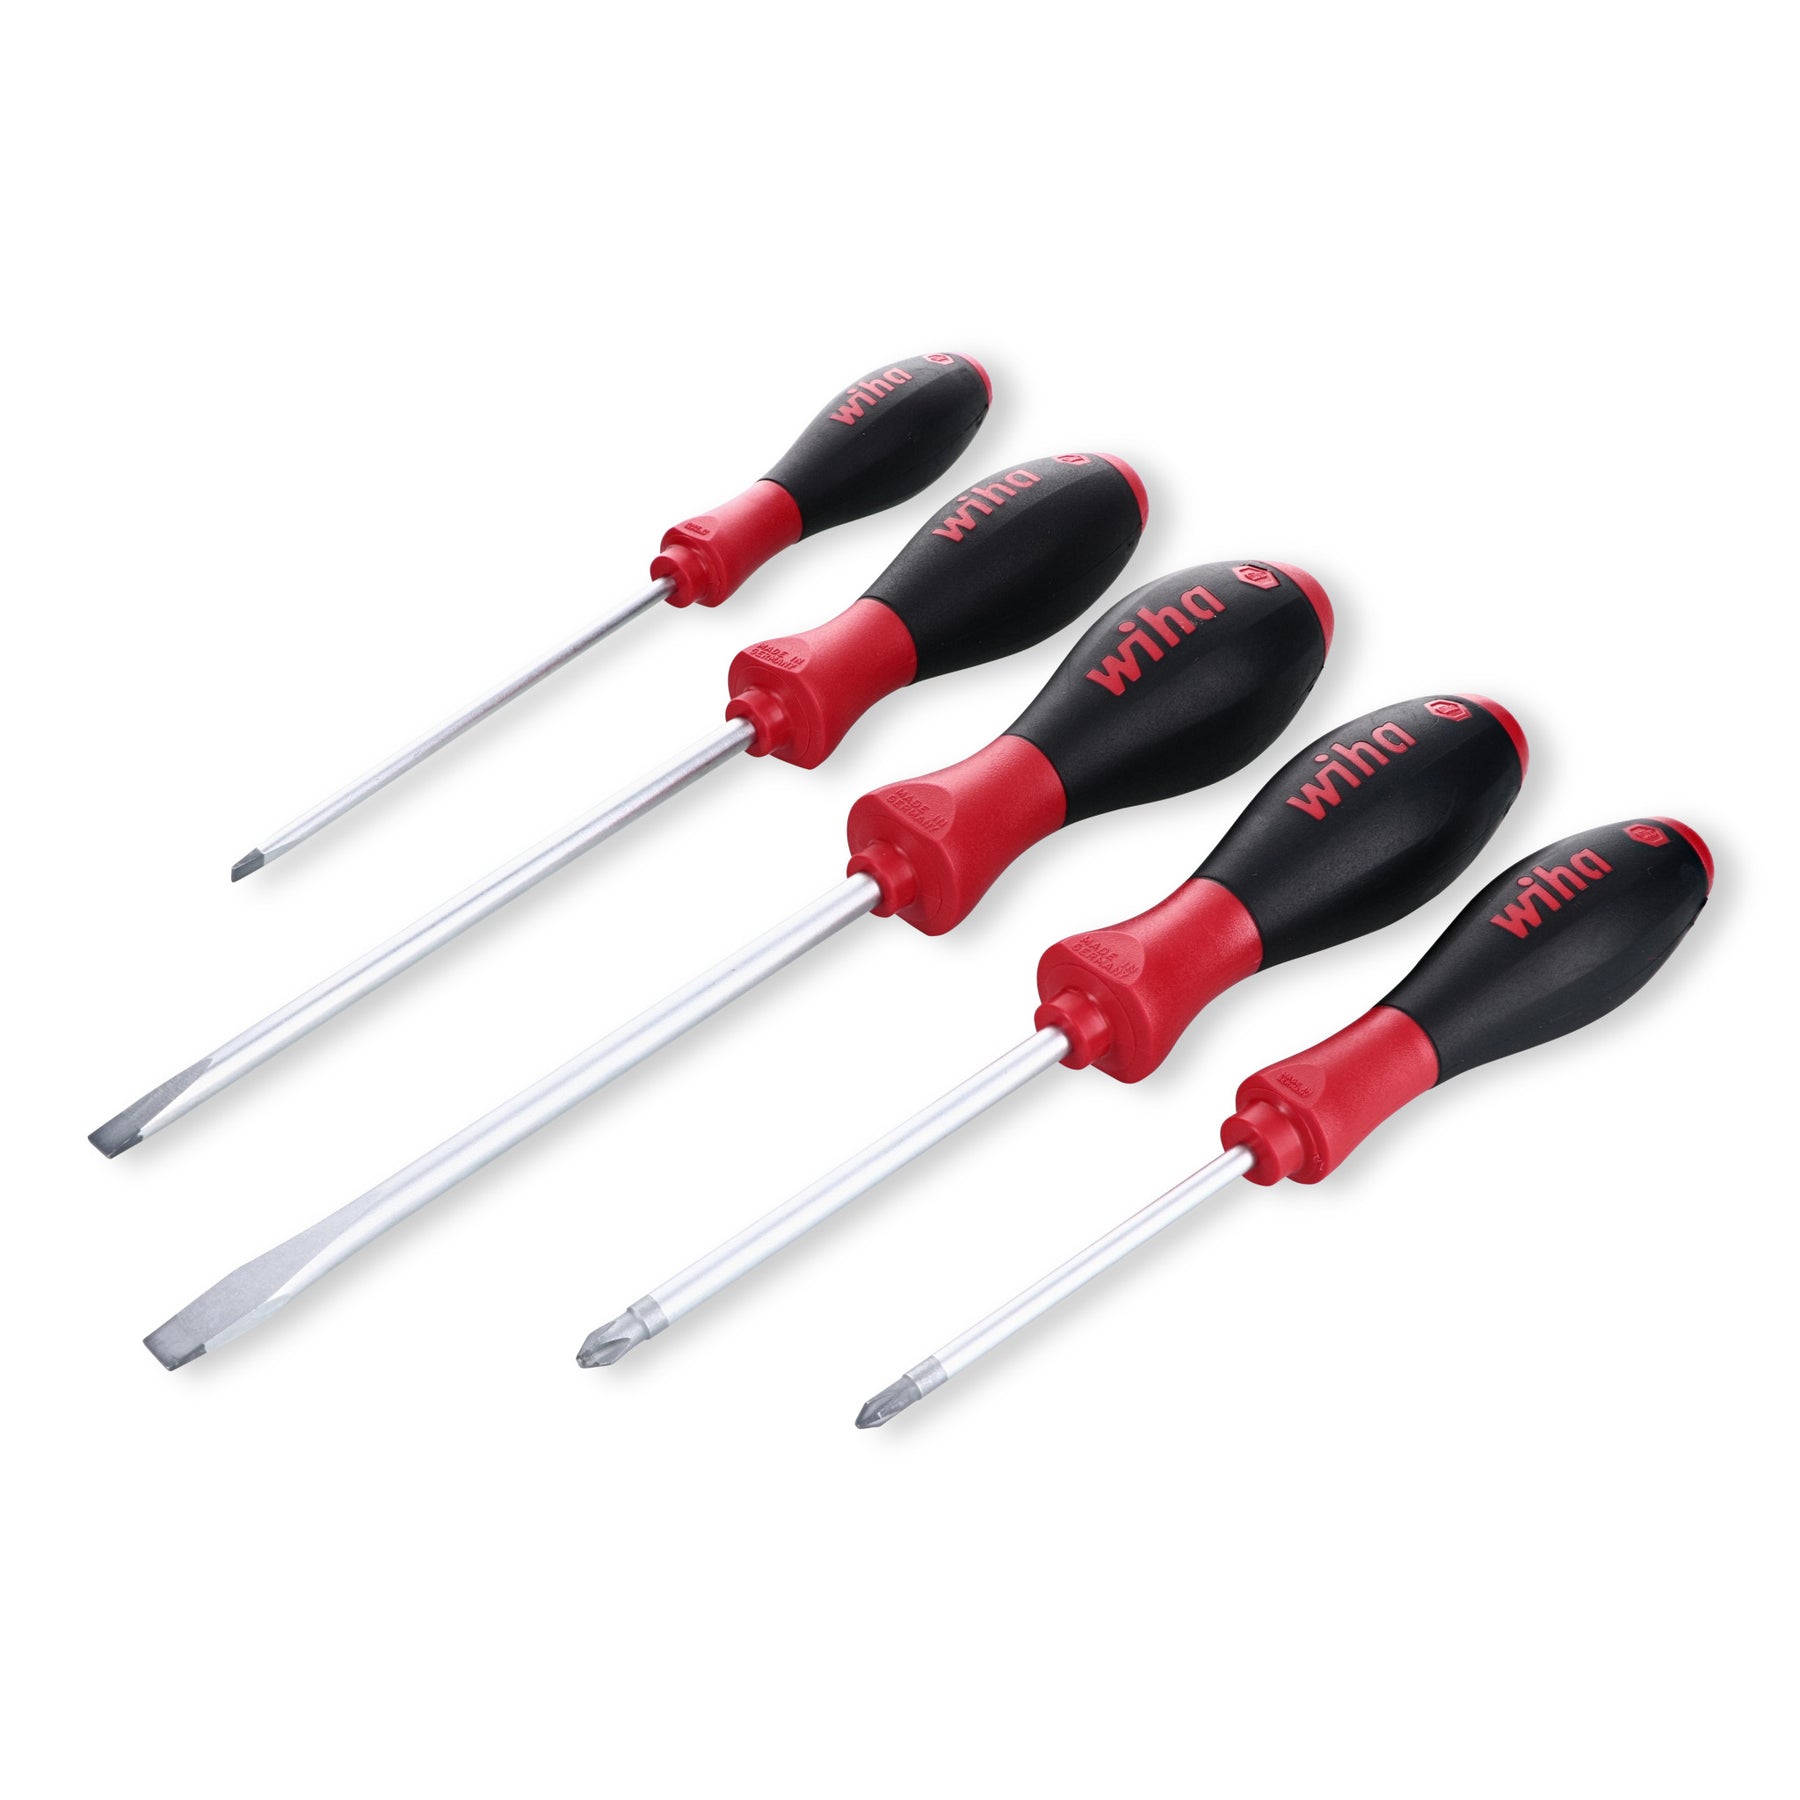 Wiha 30273 5 Piece SoftFinish Slotted and Phillips Screwdriver Set